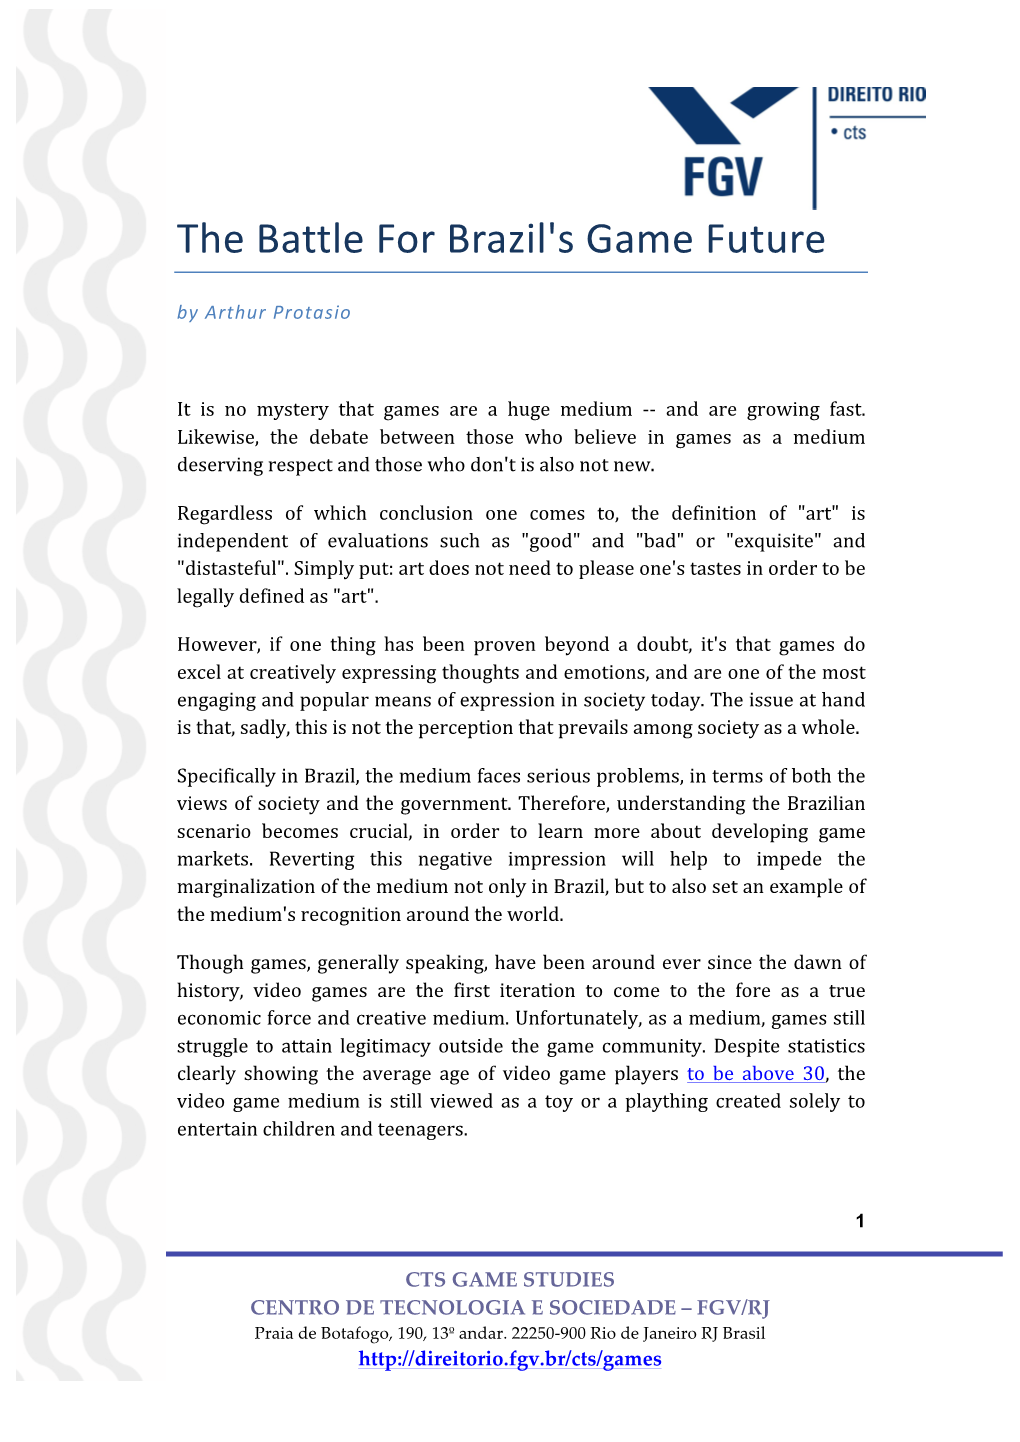 The Battle for Brazil's Game Future by Arthur Protasio